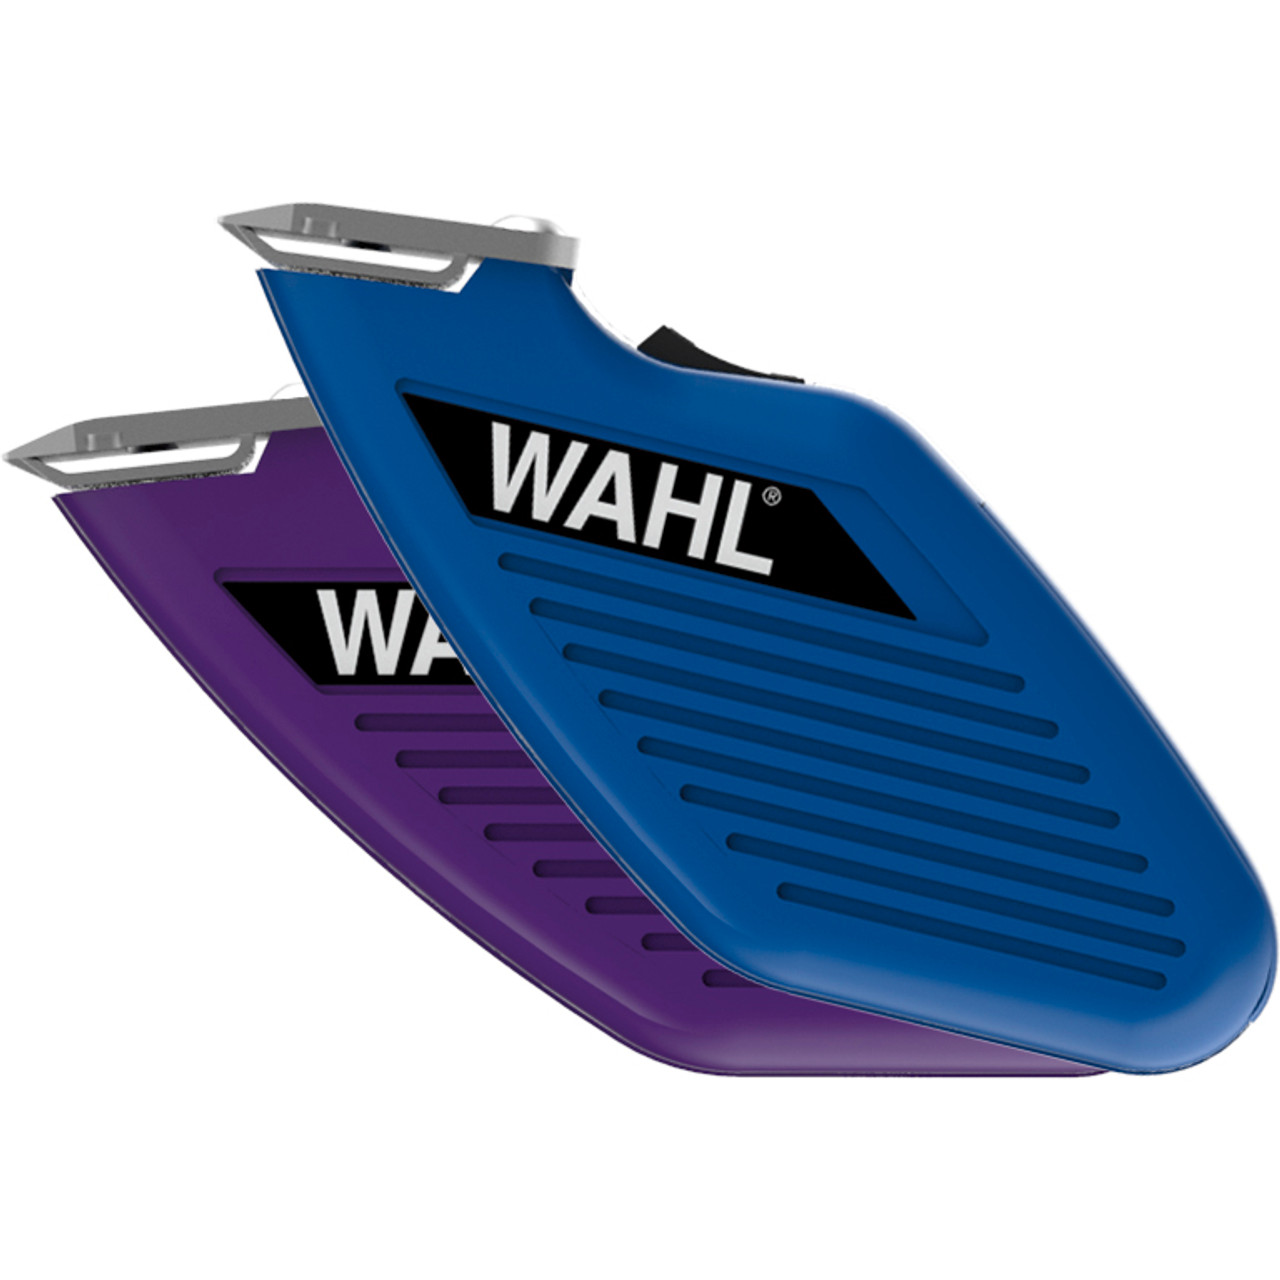 Wahl Pocket Pro Cordless Trimmer- Horse  Dog Clippers